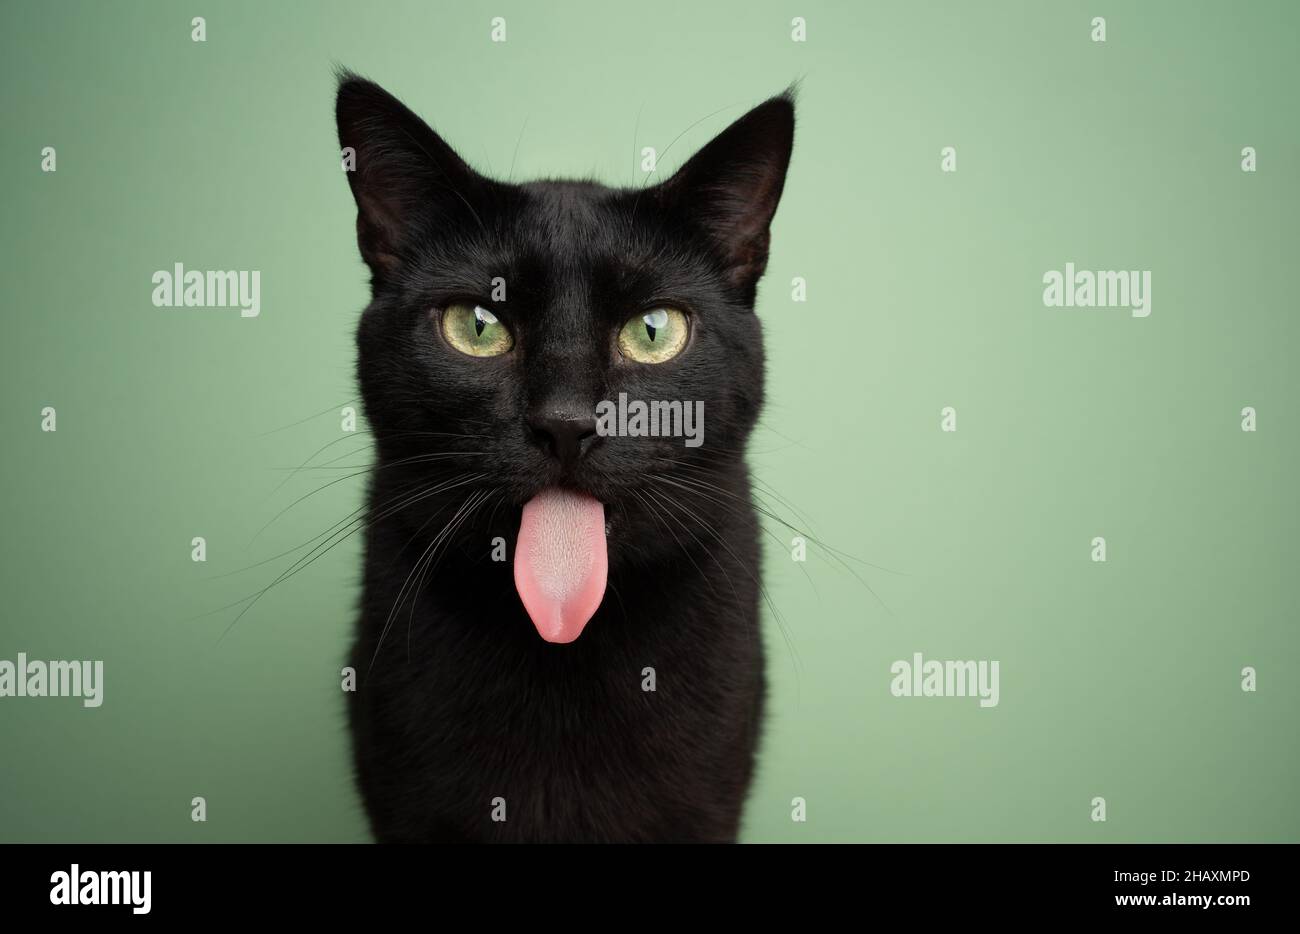 funny black cat sticking out long tongue looking at camera on green background with copy space Stock Photo